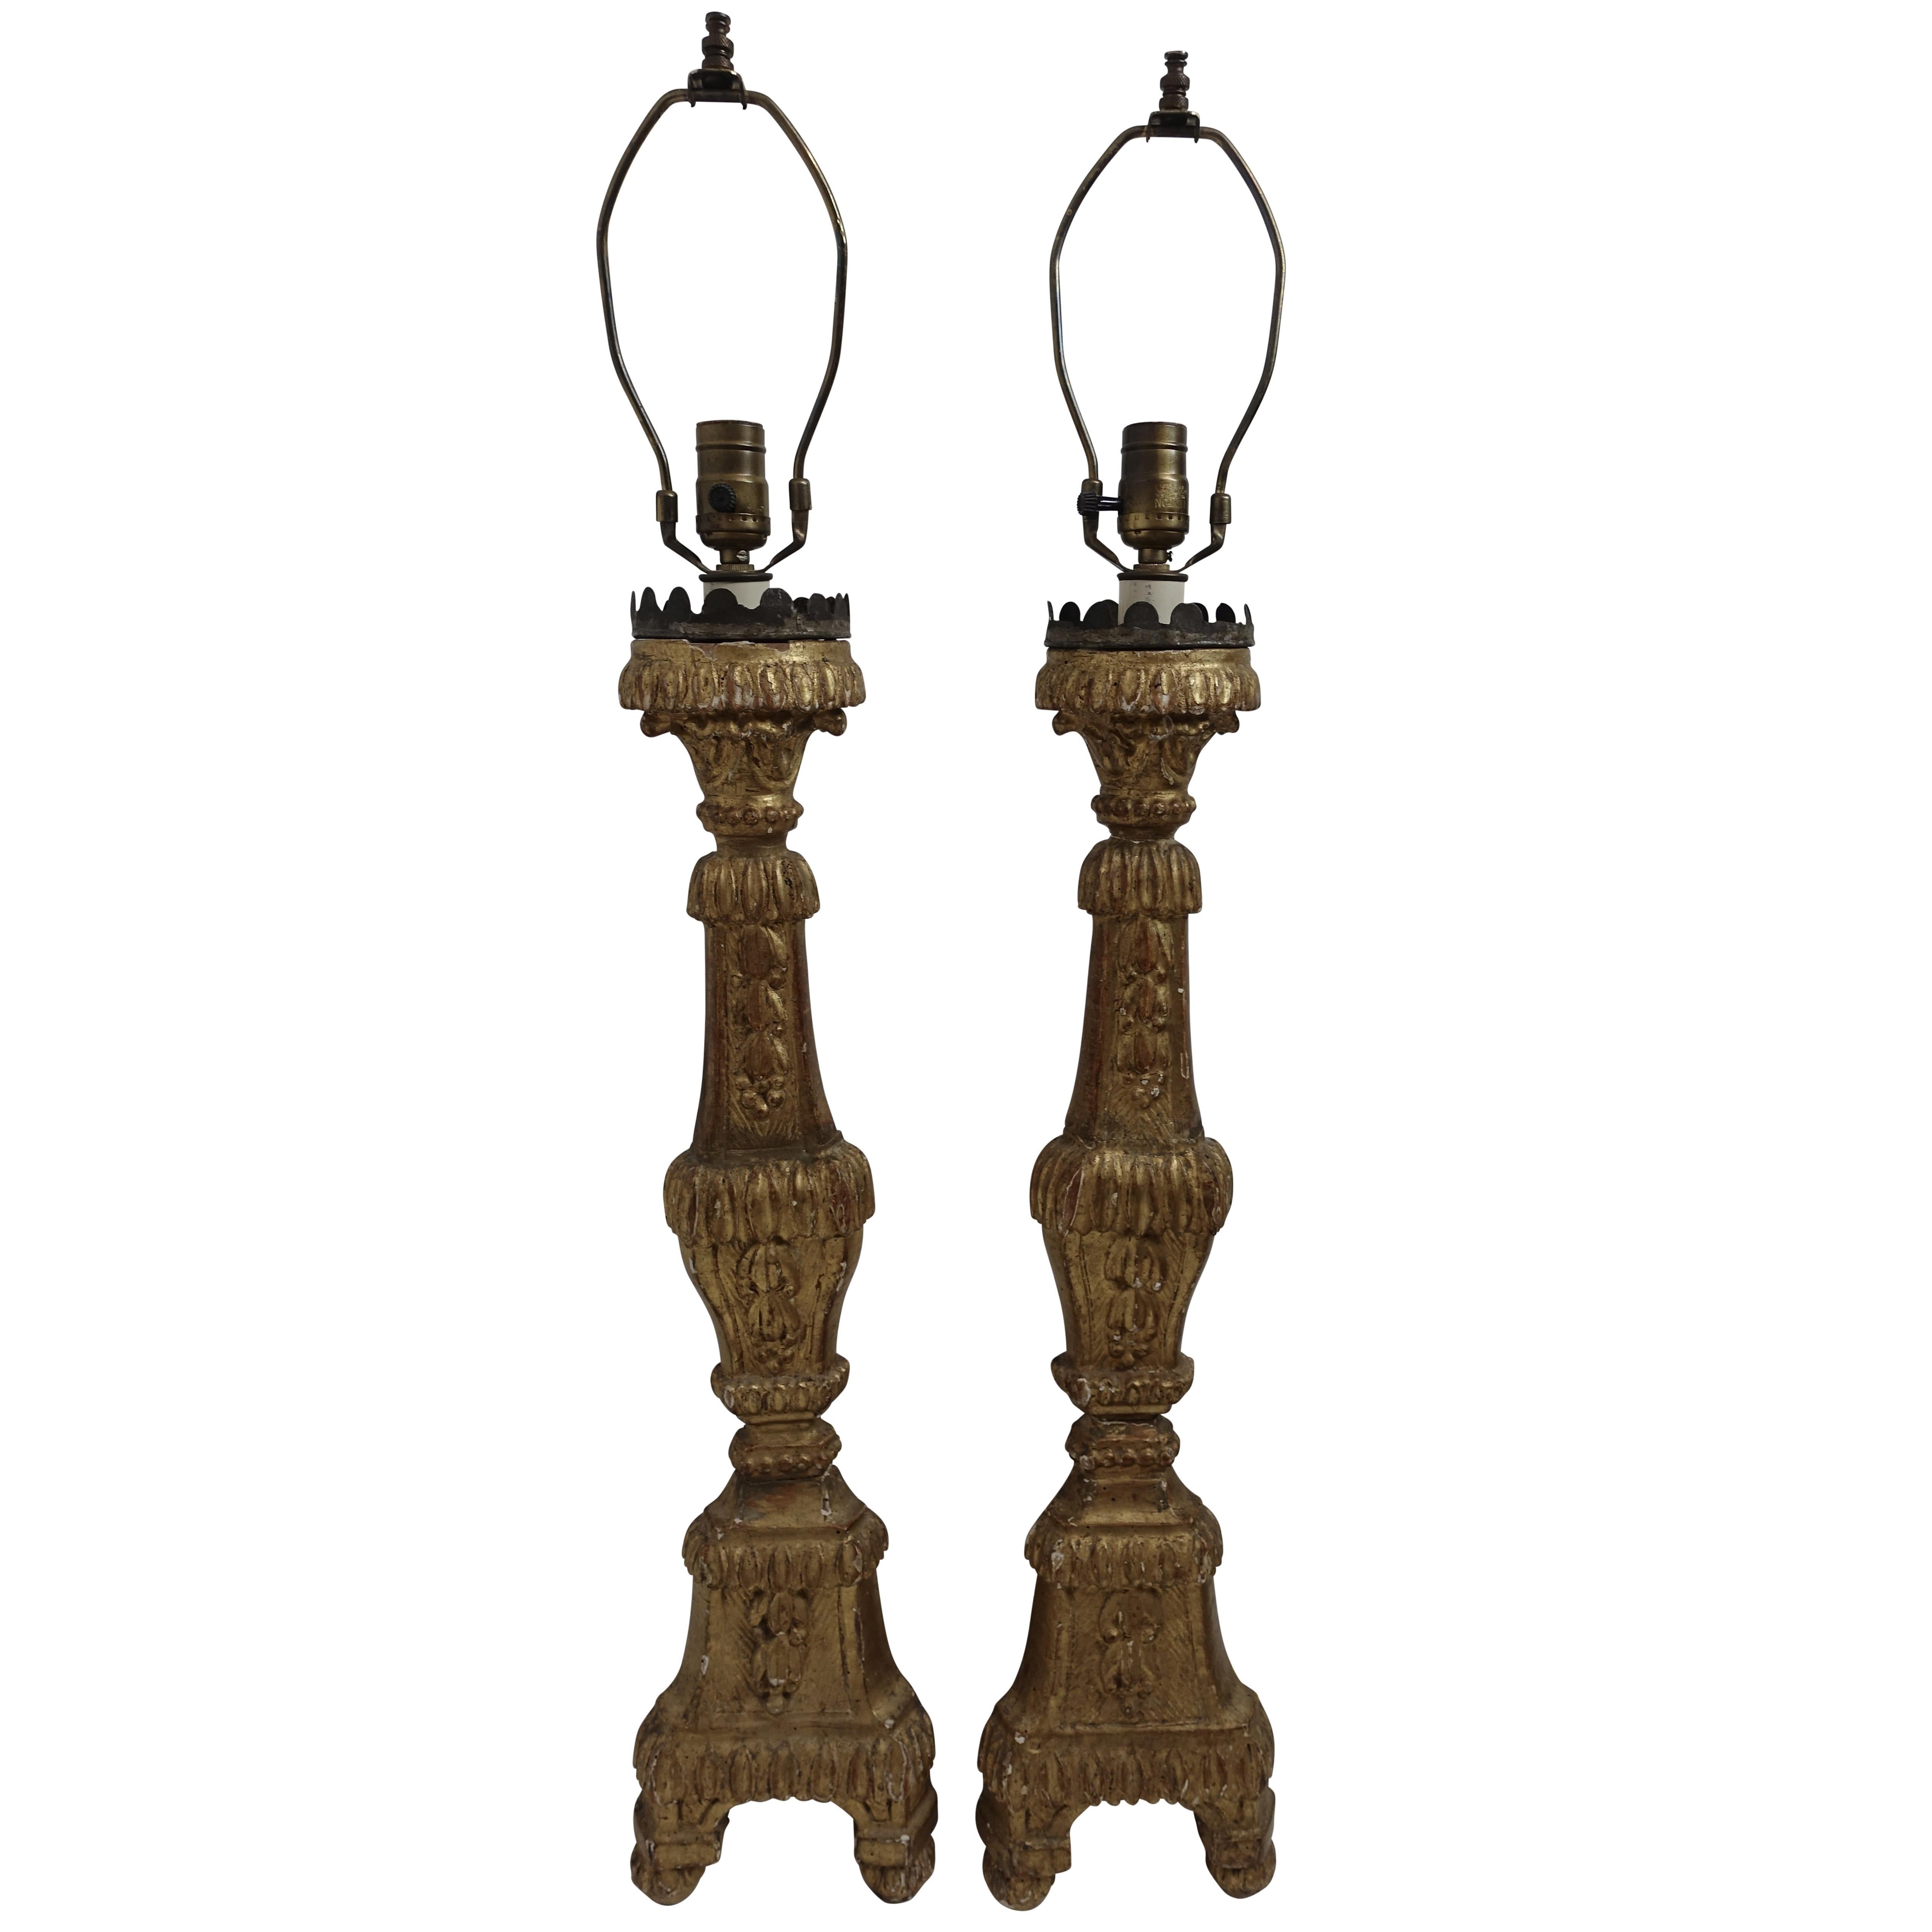 Pair of Giltwood Altar Candlestick Lamps, Italian, 18th Century